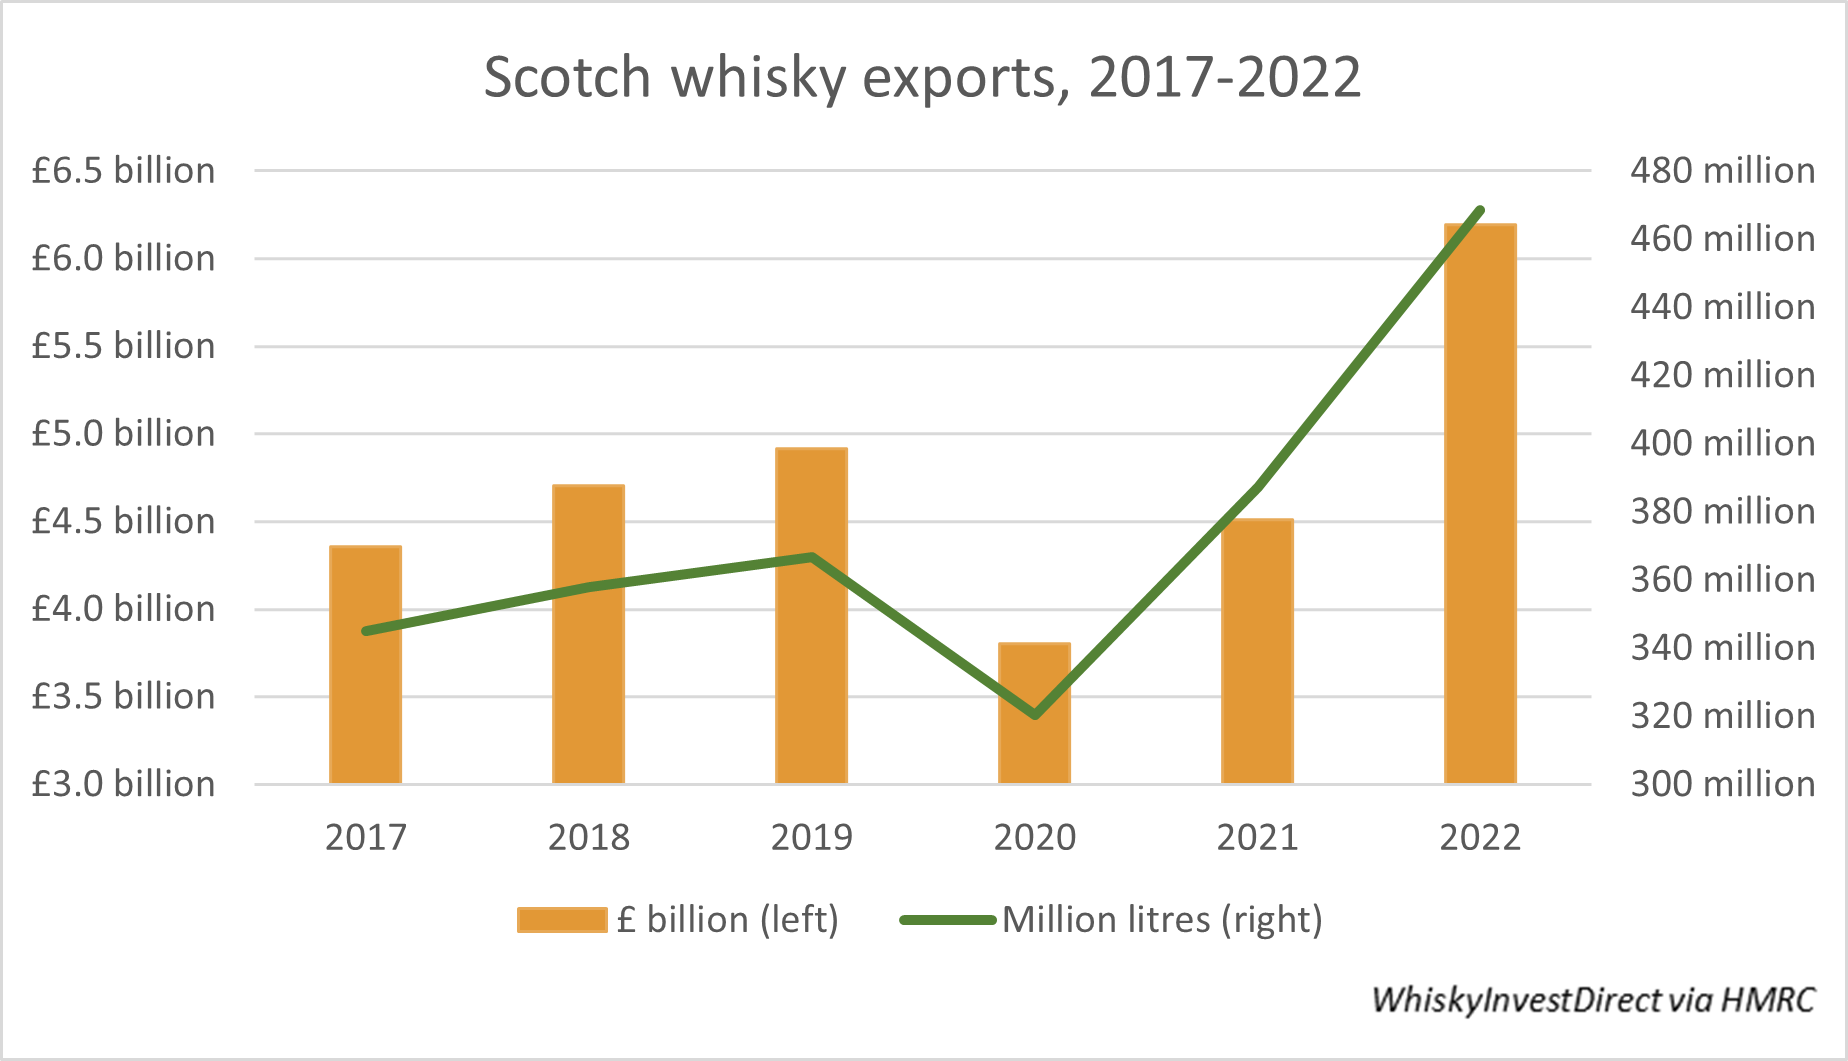 (A chart of Scotch whisky exports from 2017-2022) 2022 was an annus mirabilis for Scotch whisky, with all fear of post-pandemic lethargy long-forgotten